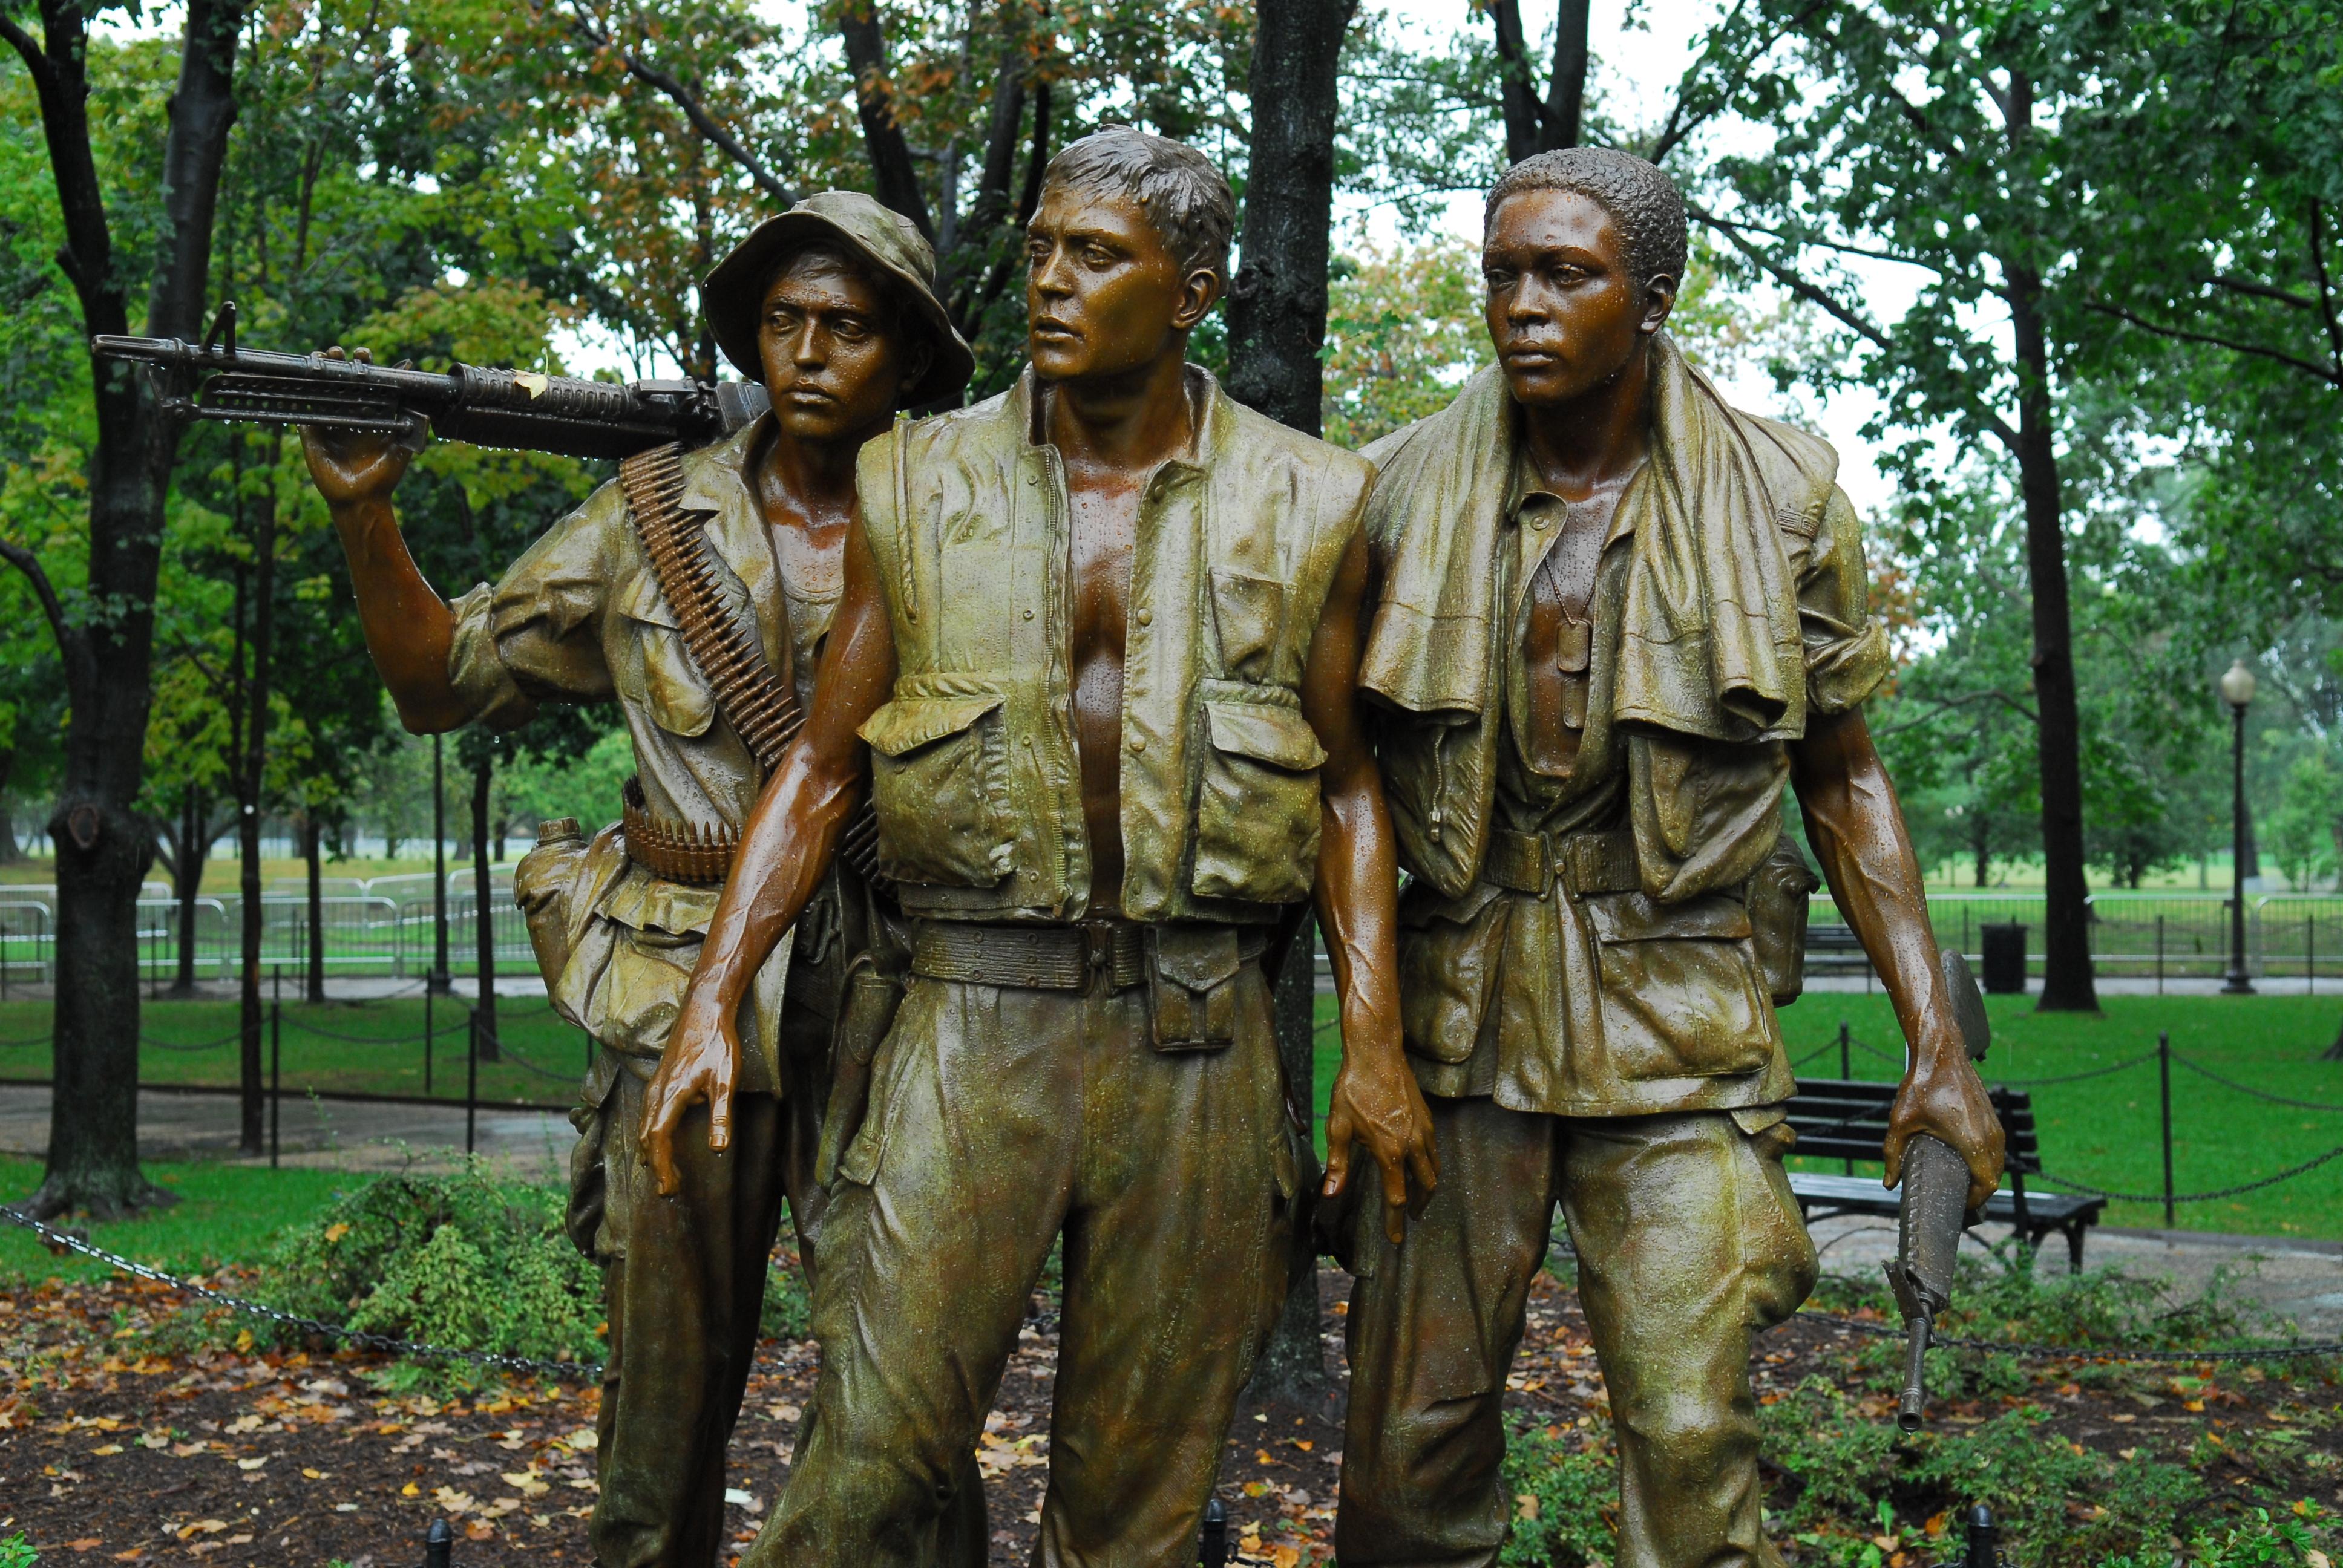 A bronze statue of three soldiers standing together, carrying weapons, and looking to their right.